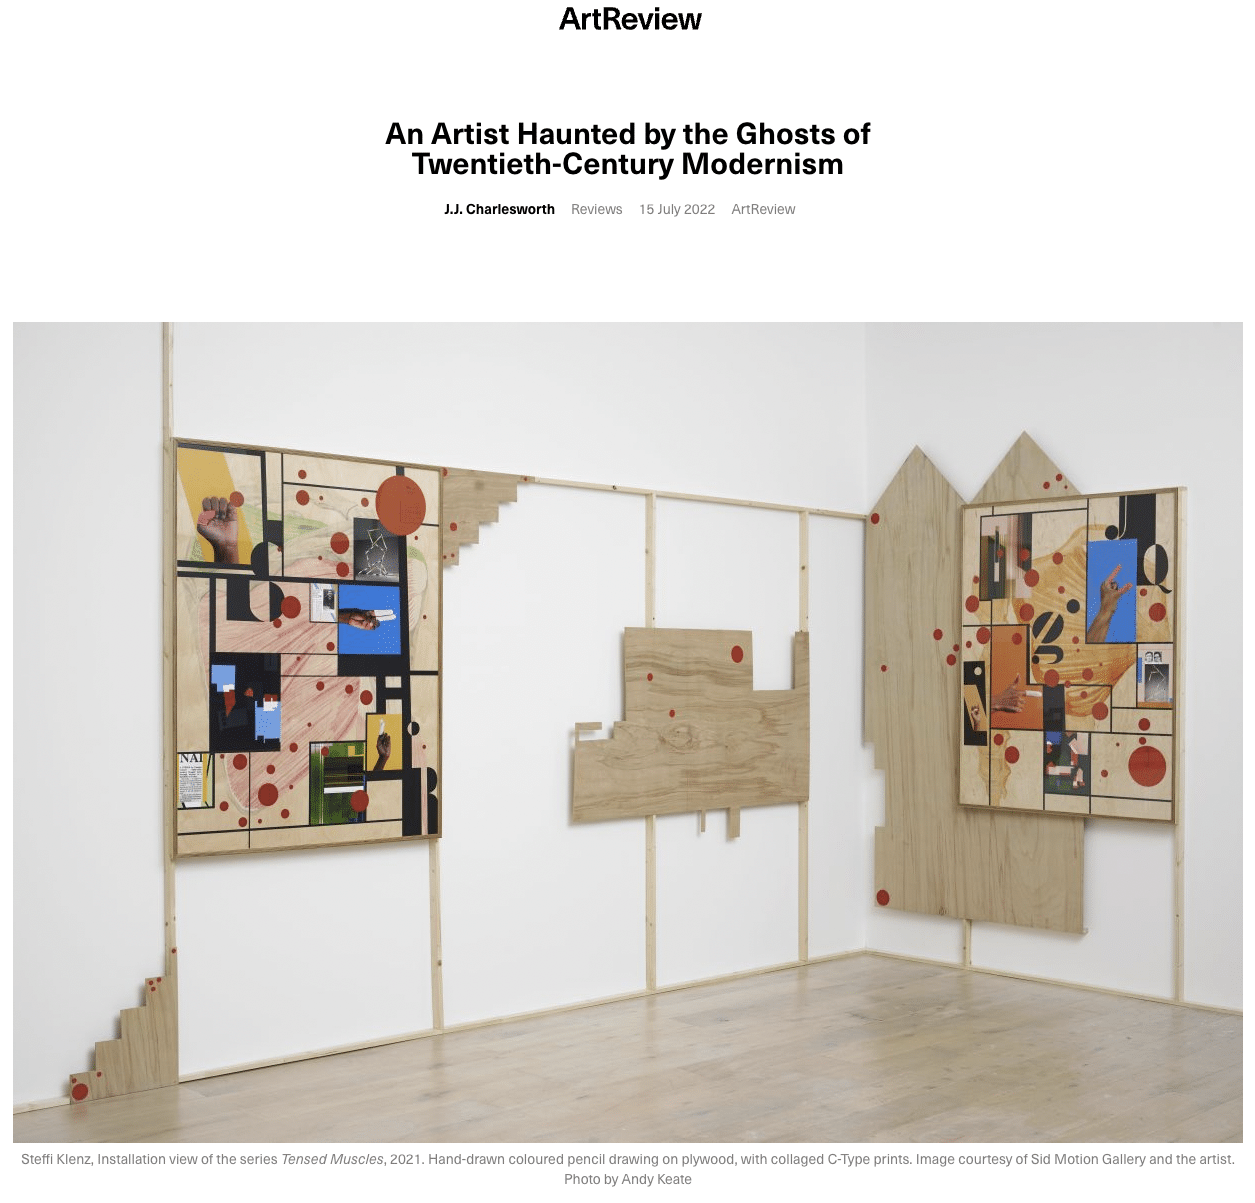 Steffi Klenz's 'Concrete Thinking' reviewed in ArtReview